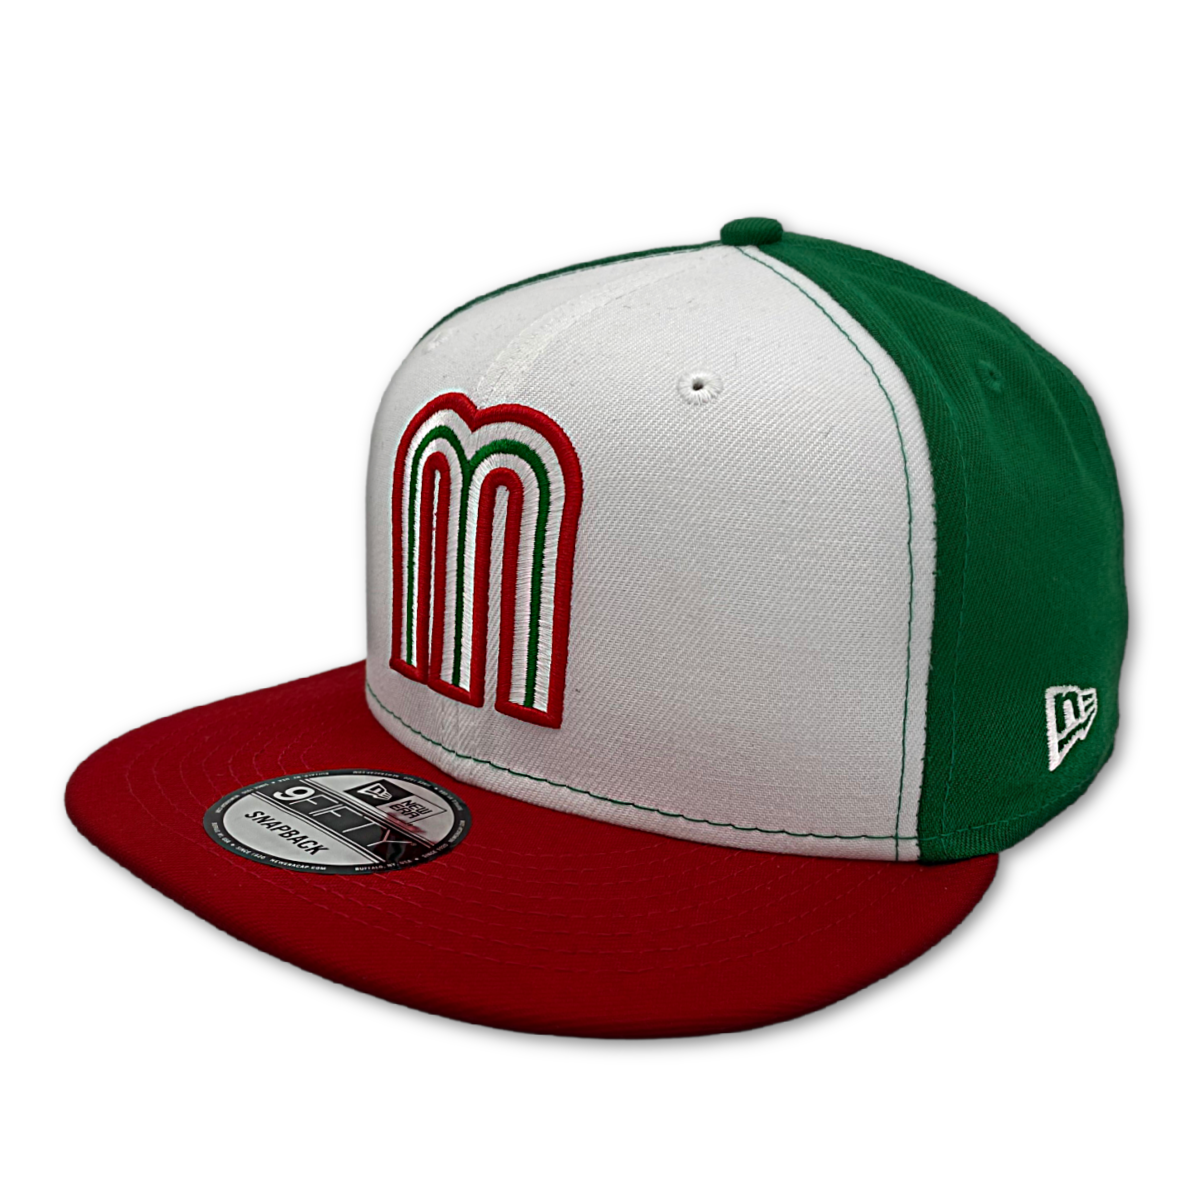 NEW ERA OFFICIAL WBC MEXICO TEAM TRI COLOR 9FIFTY FITTED HAT nvsoccer.com The Coliseum